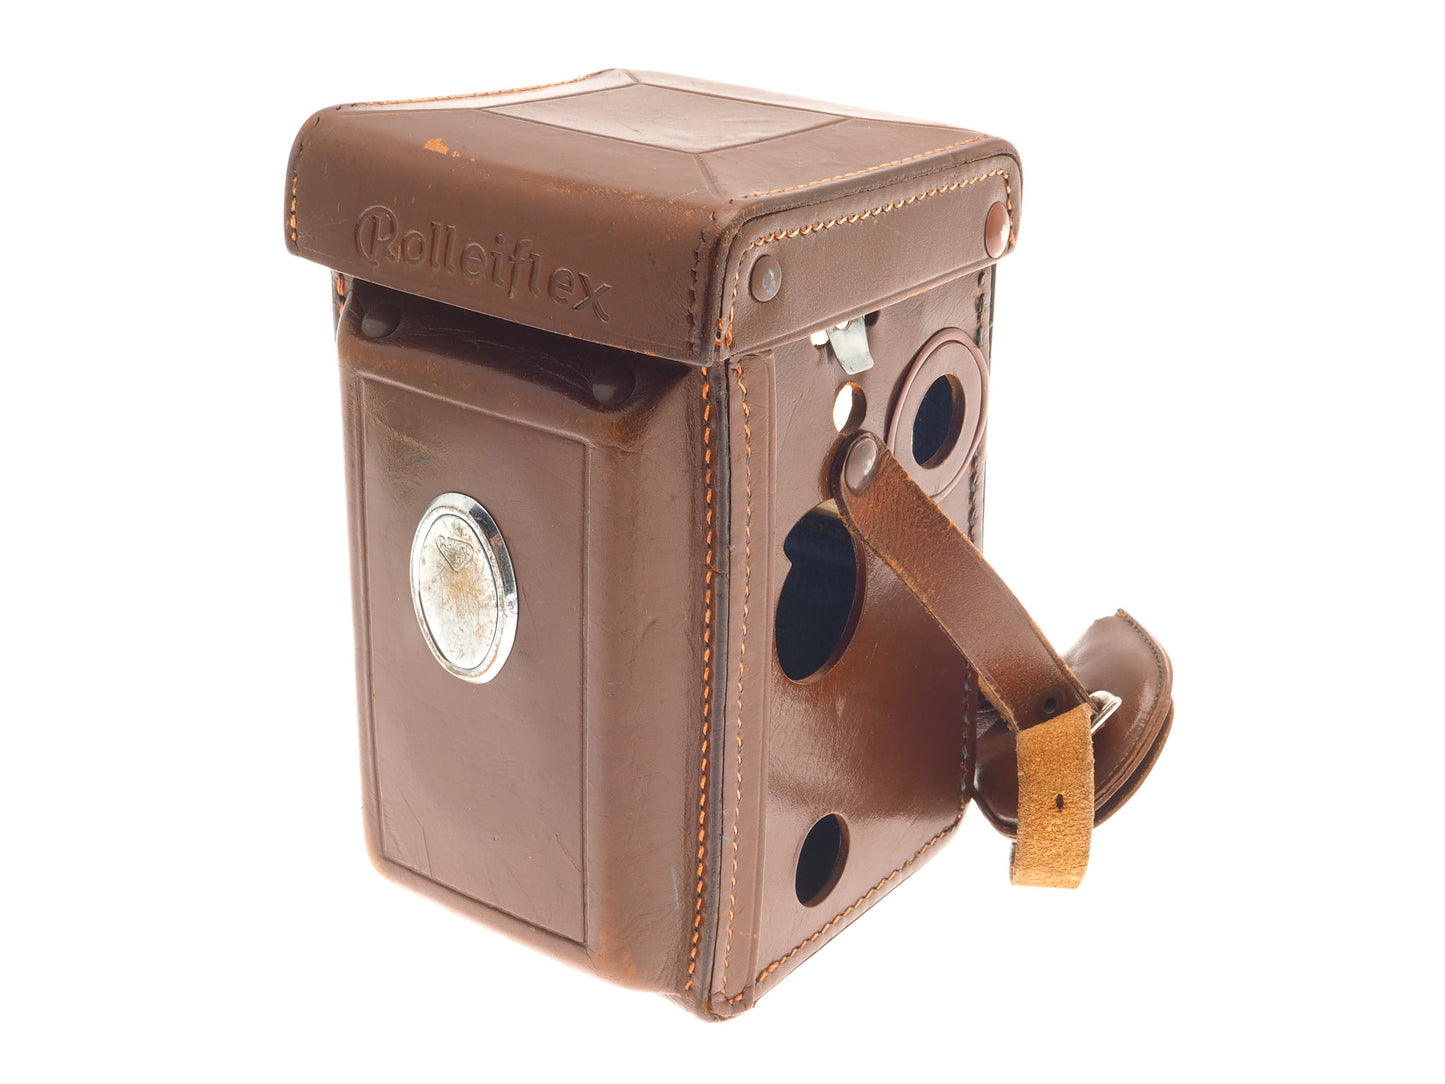 Rollei Automat Leather Case - Accessory